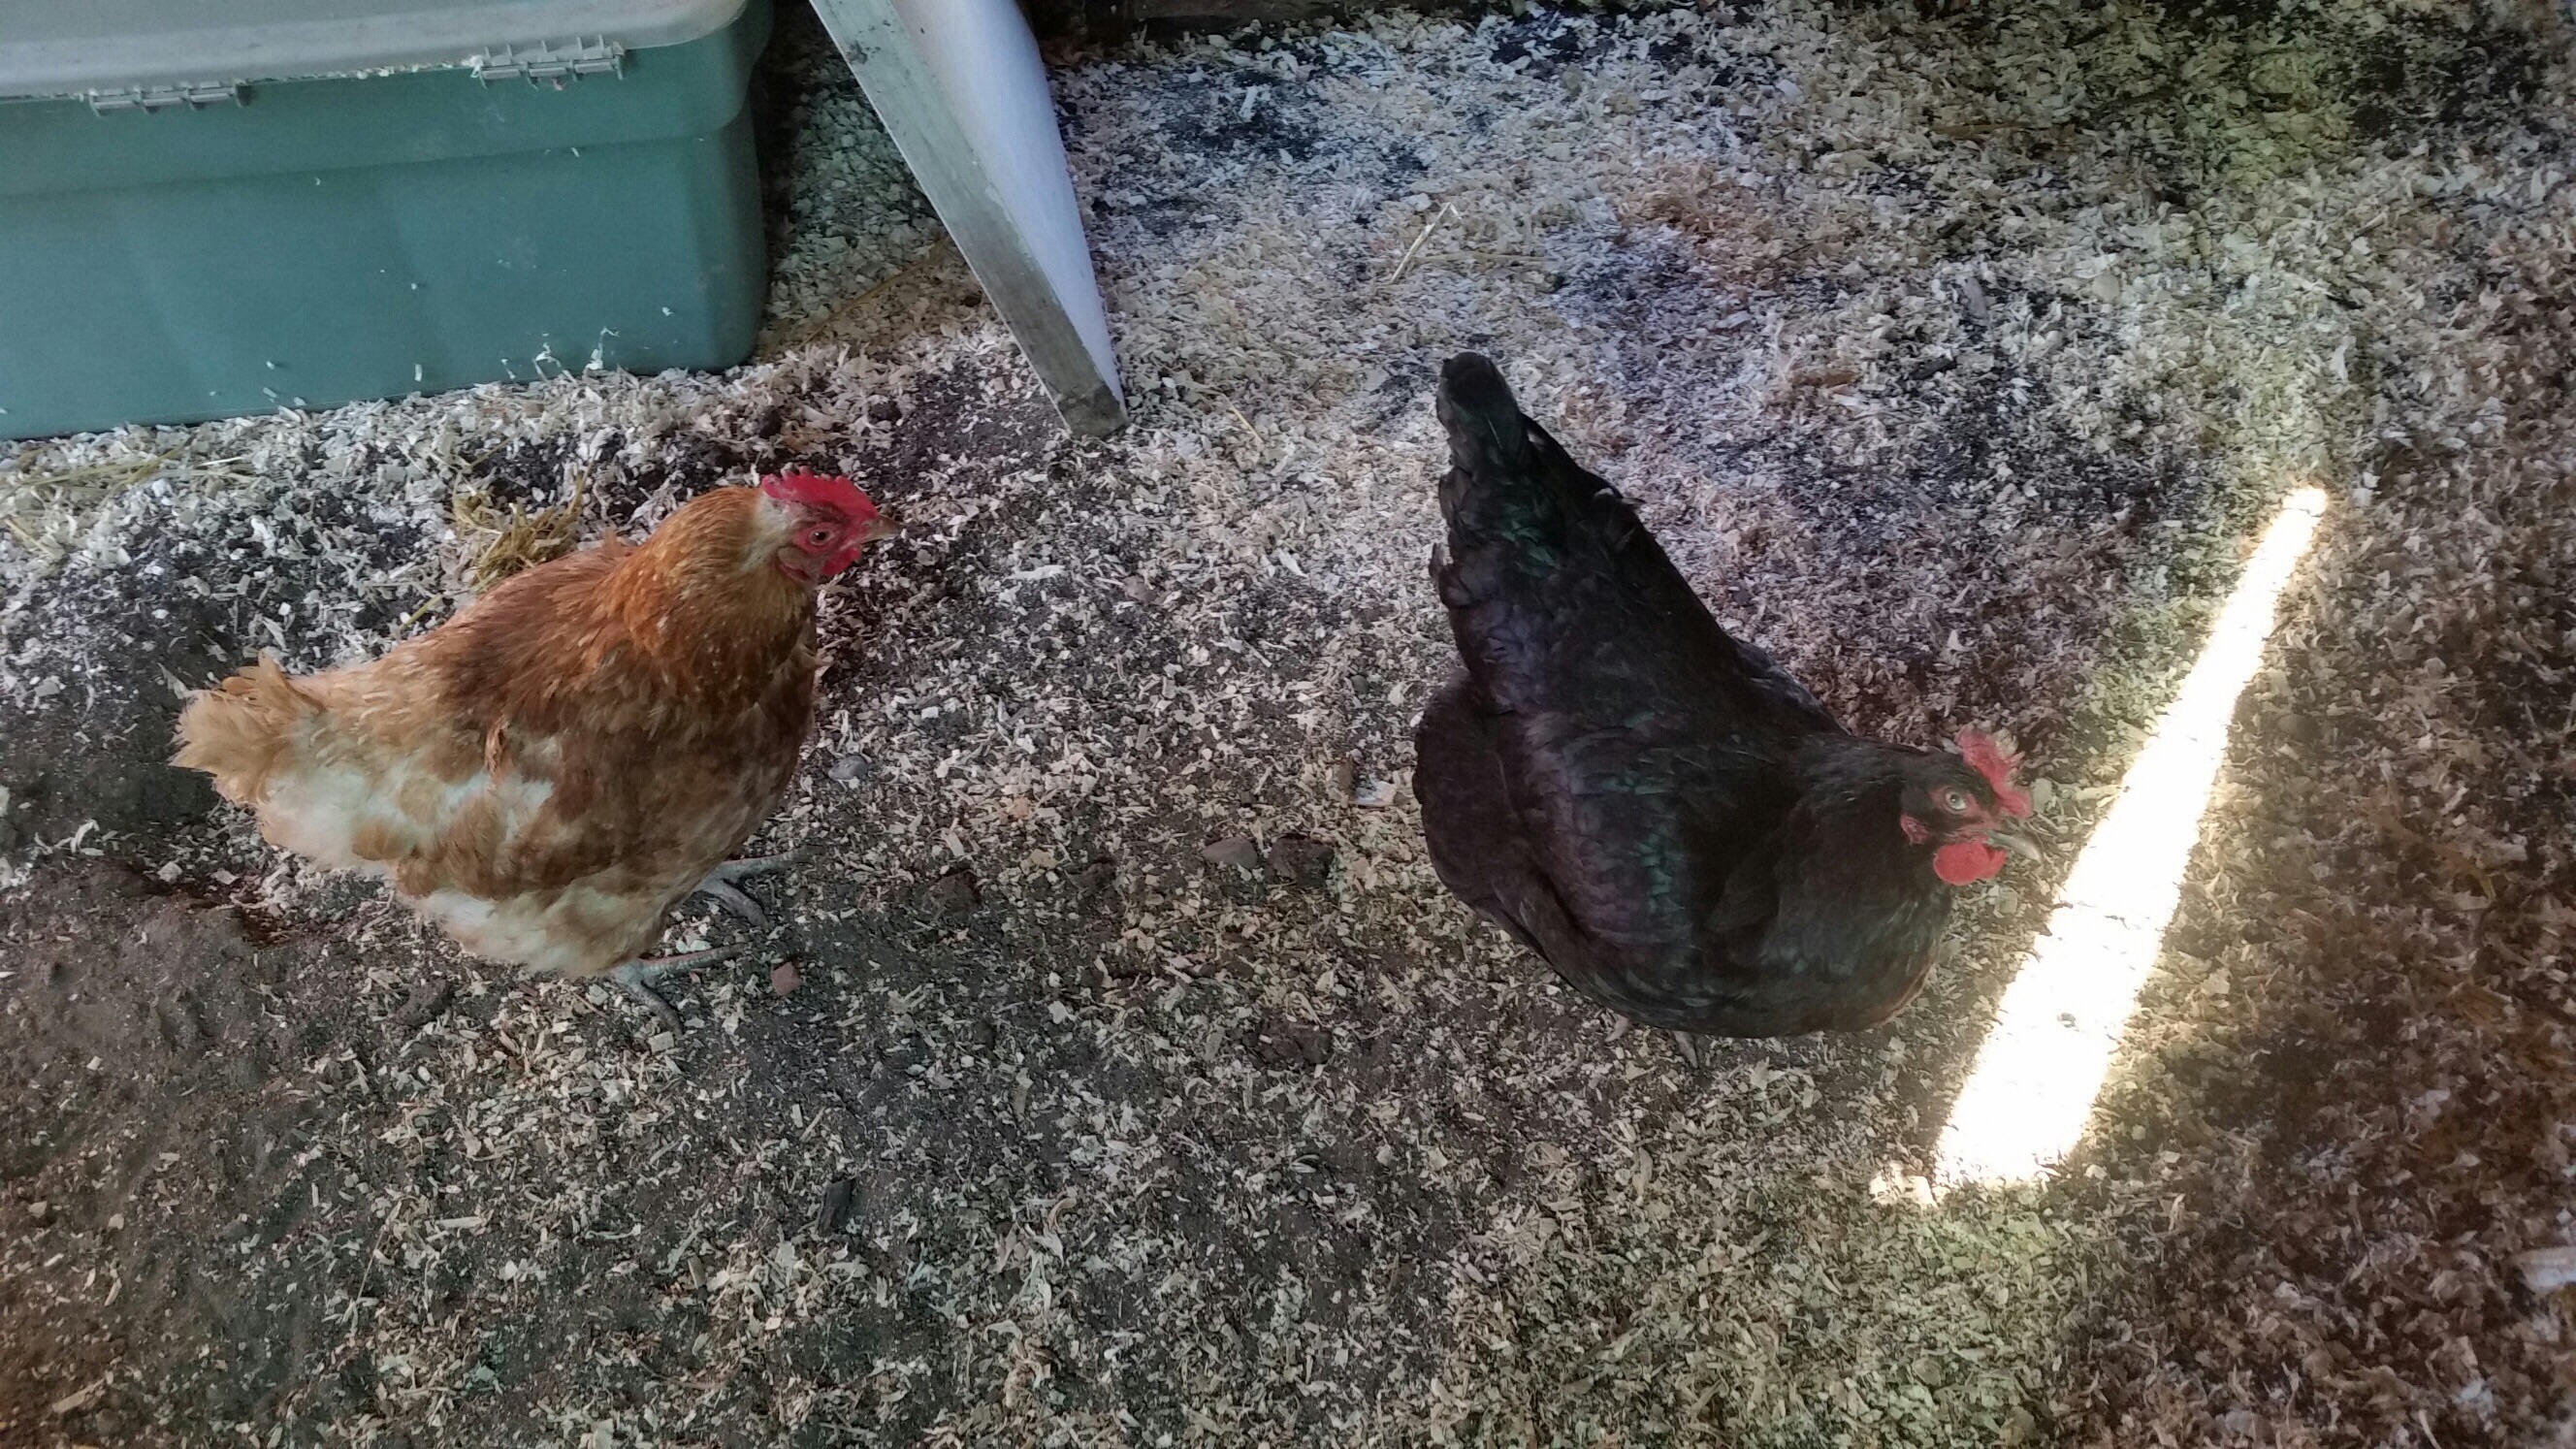 she threw in this extra hen that looks like the same breed as the rooster but she's black.